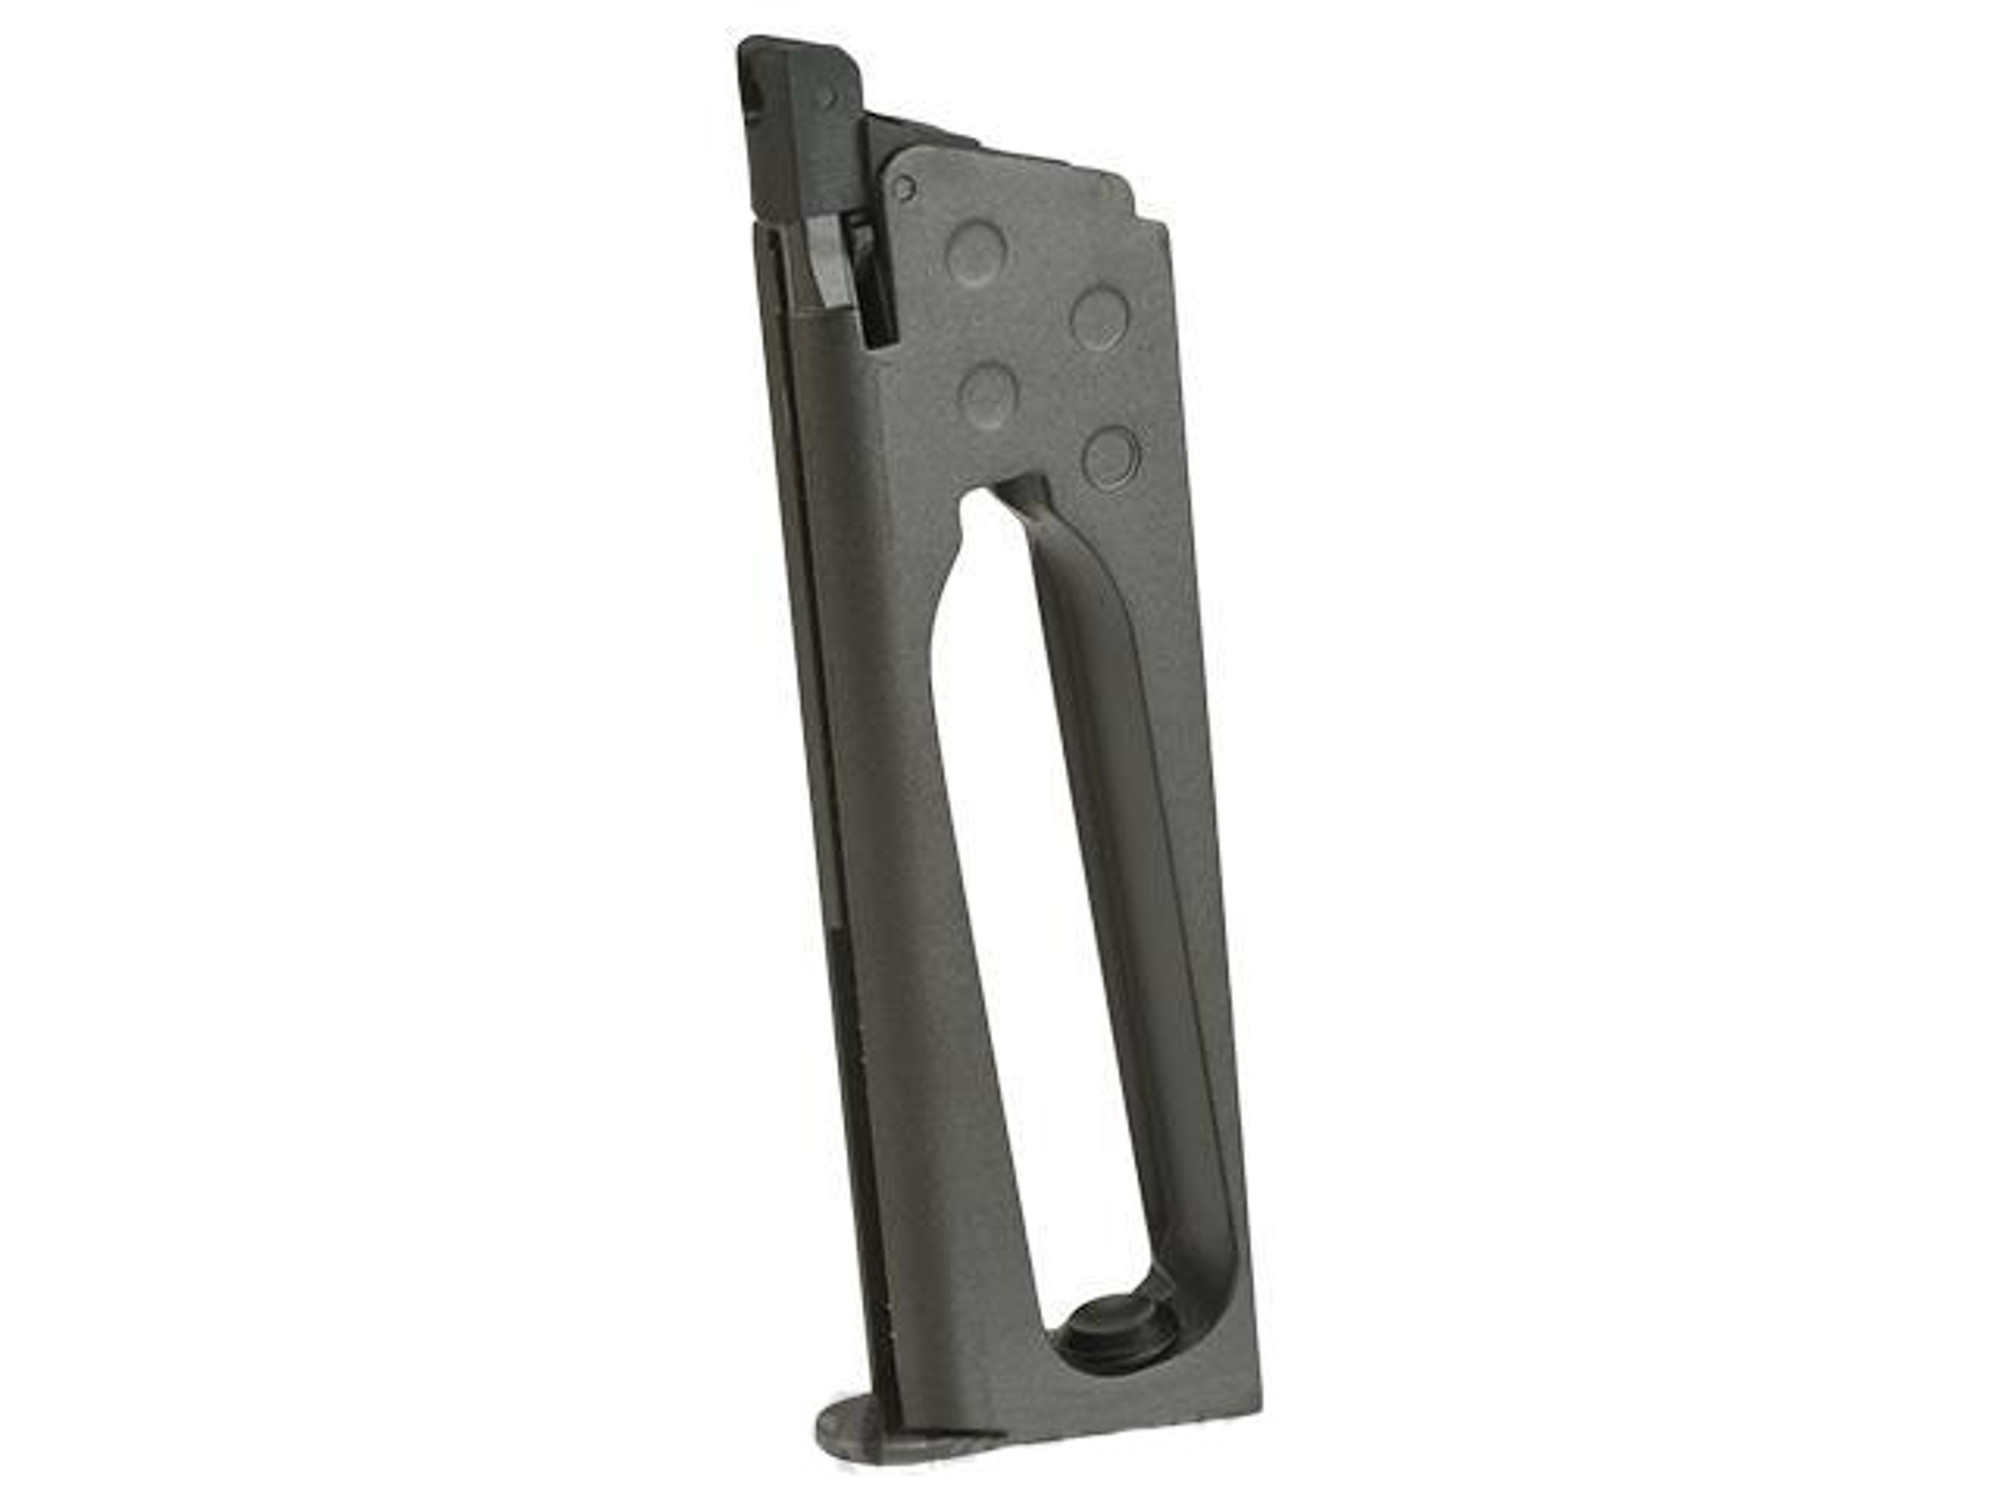 CO2 Gas Magazine for 4.5mm 1911 CO2 Gas Air Pistols